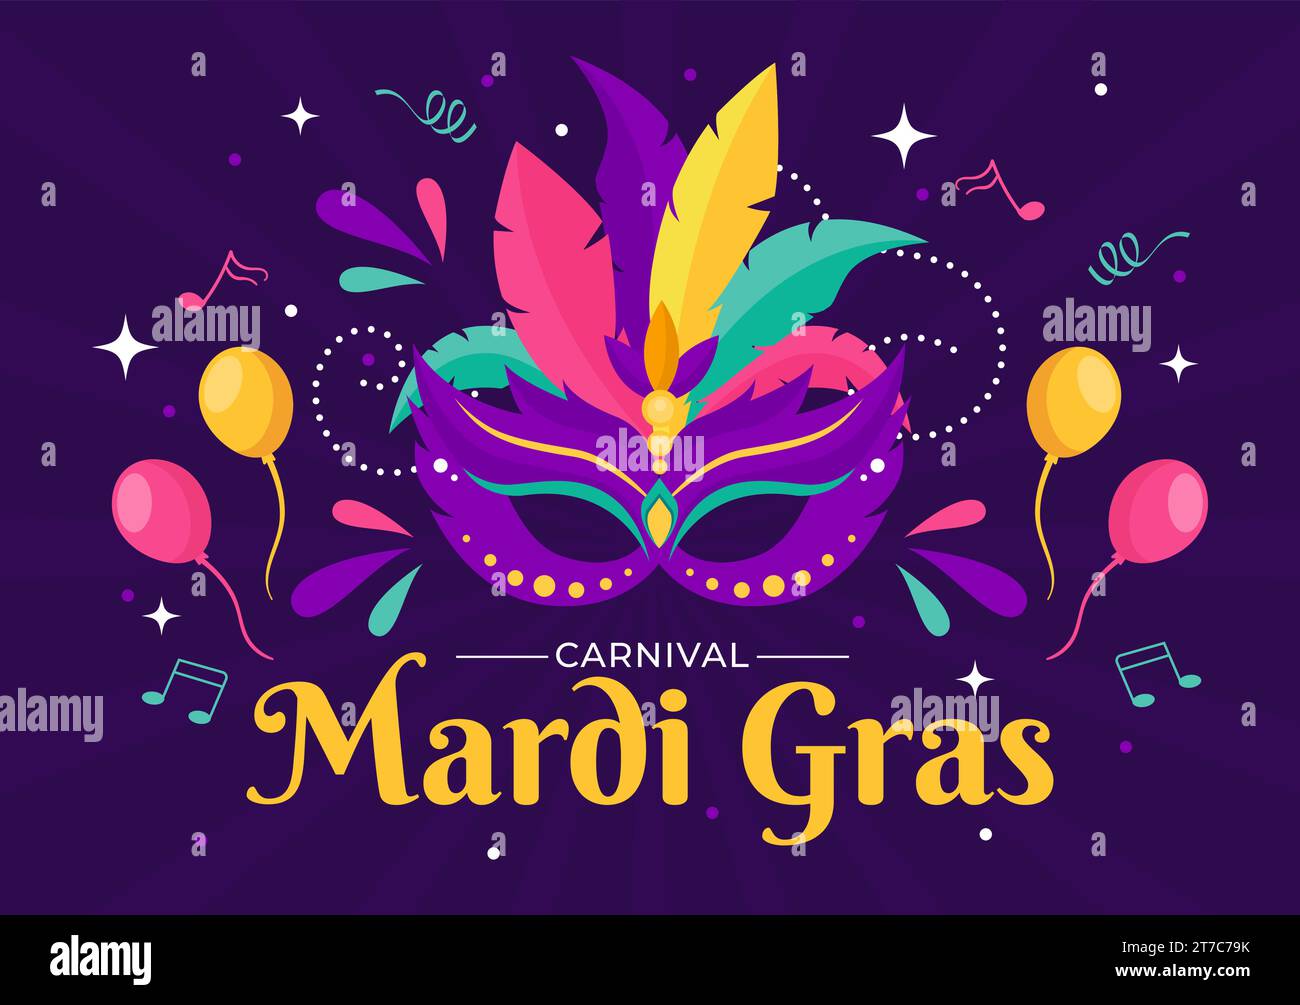 Mardi Gras Carnival Vector Illustration. Translation is French for Fat Tuesday. Festival with Masks, Maracas, Guitar and Feathers on Purple Background Stock Vector